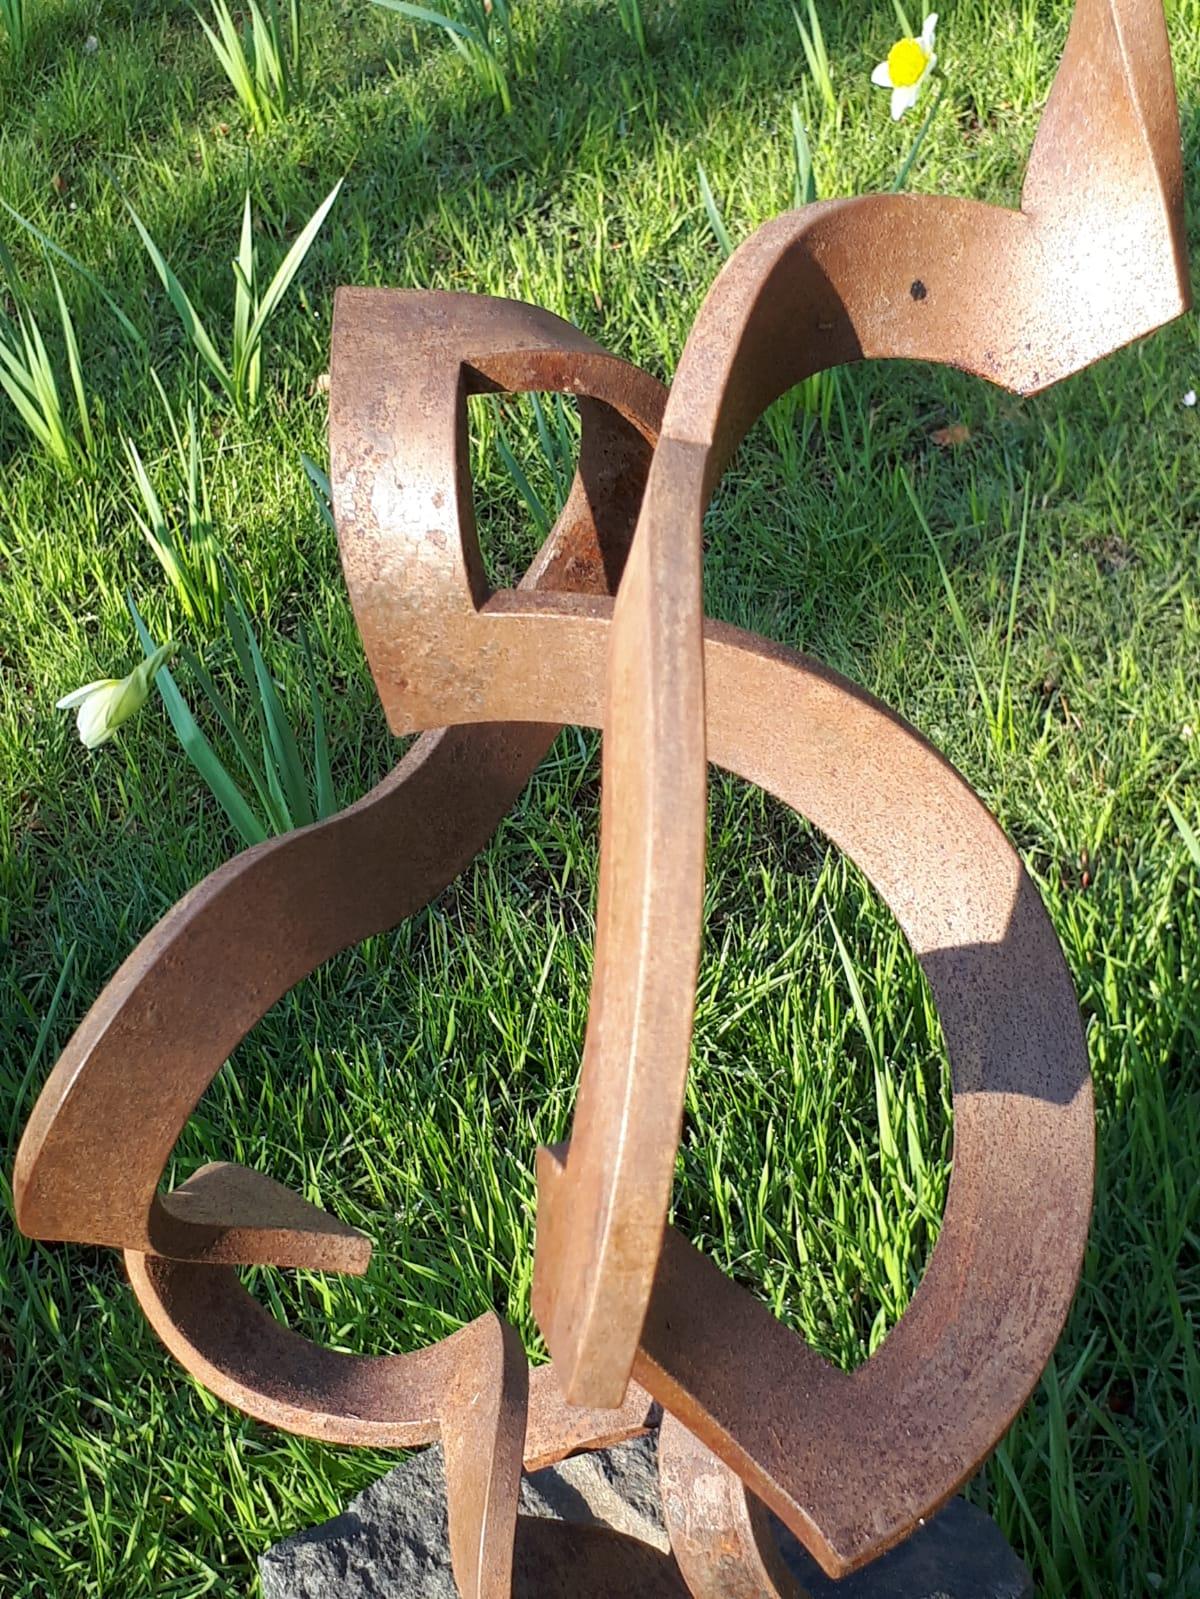 Dancing Spiral by Kuno Vollet - Contemporary Rusted Steel sculpture for Outdoors 3